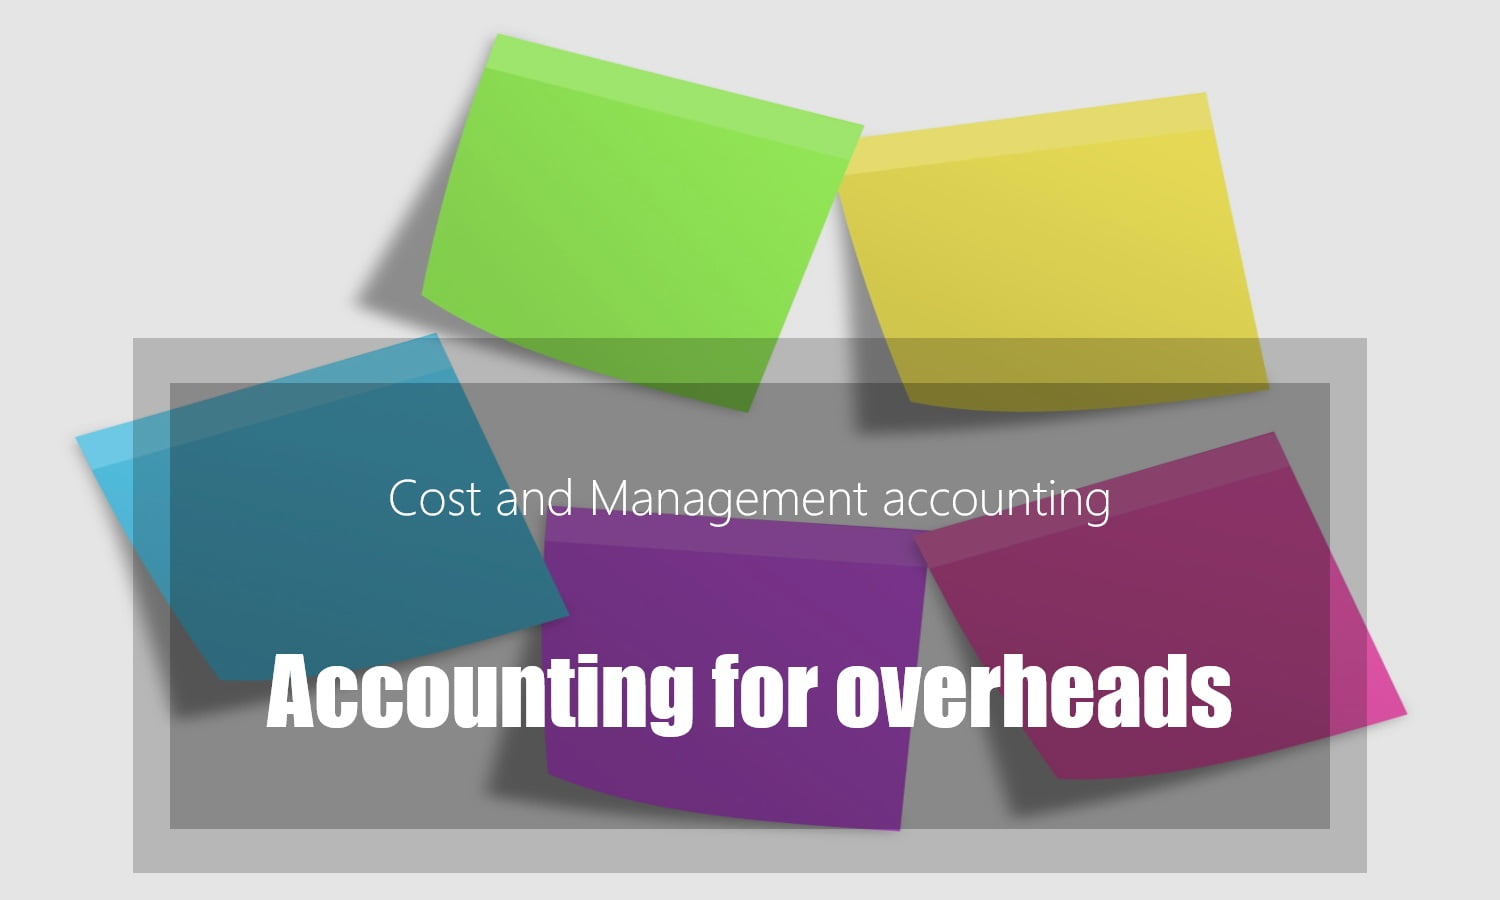 Accounting for overheads, Introduction to cost and management accounting, Cost Estimation, High/Low, Linear Regression Analysis